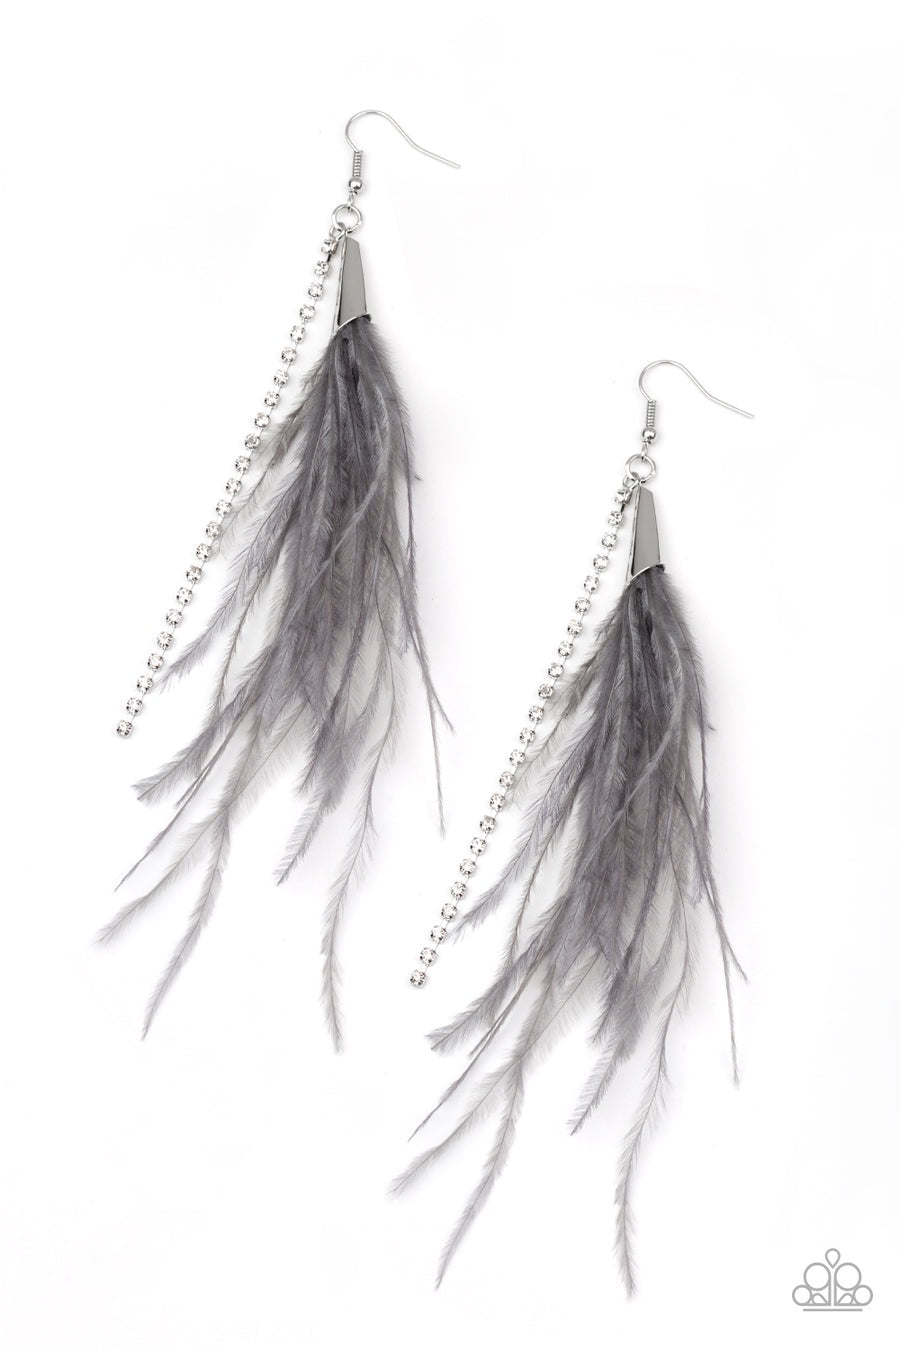 PAPARAZZI SHOWSTOPPING SHOWGIRL SILVER EARRINGS - Paparazzi jewelry images